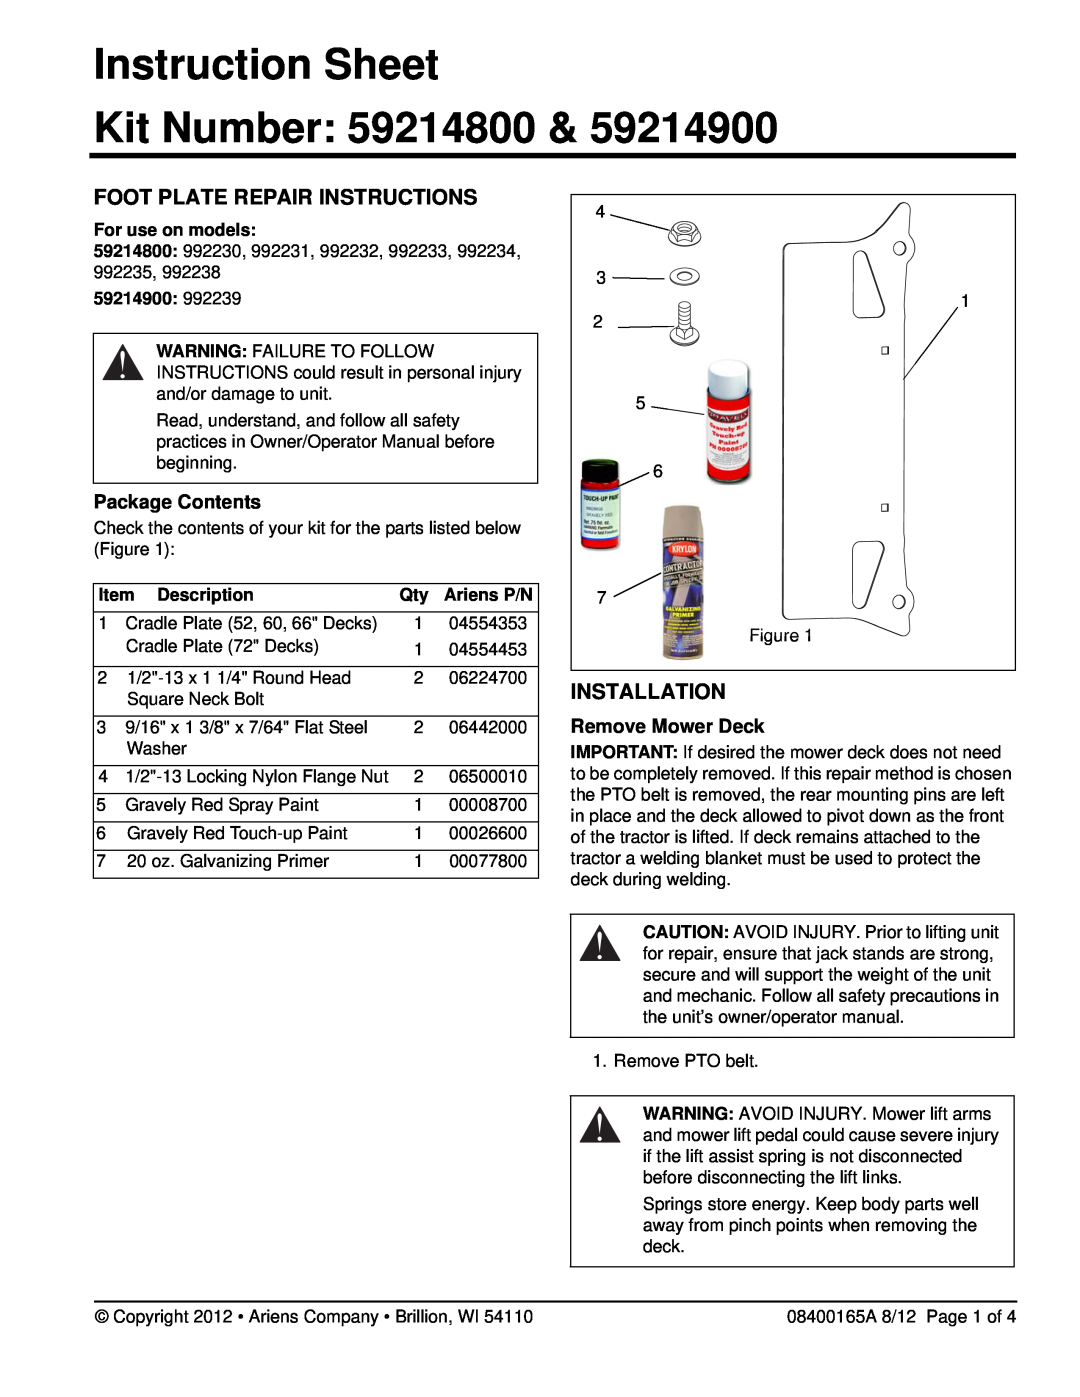 Ariens 992232 Foot Plate Repair Instructions, Installation, For use on models, 59214900, Item Description, Ariens P/N 